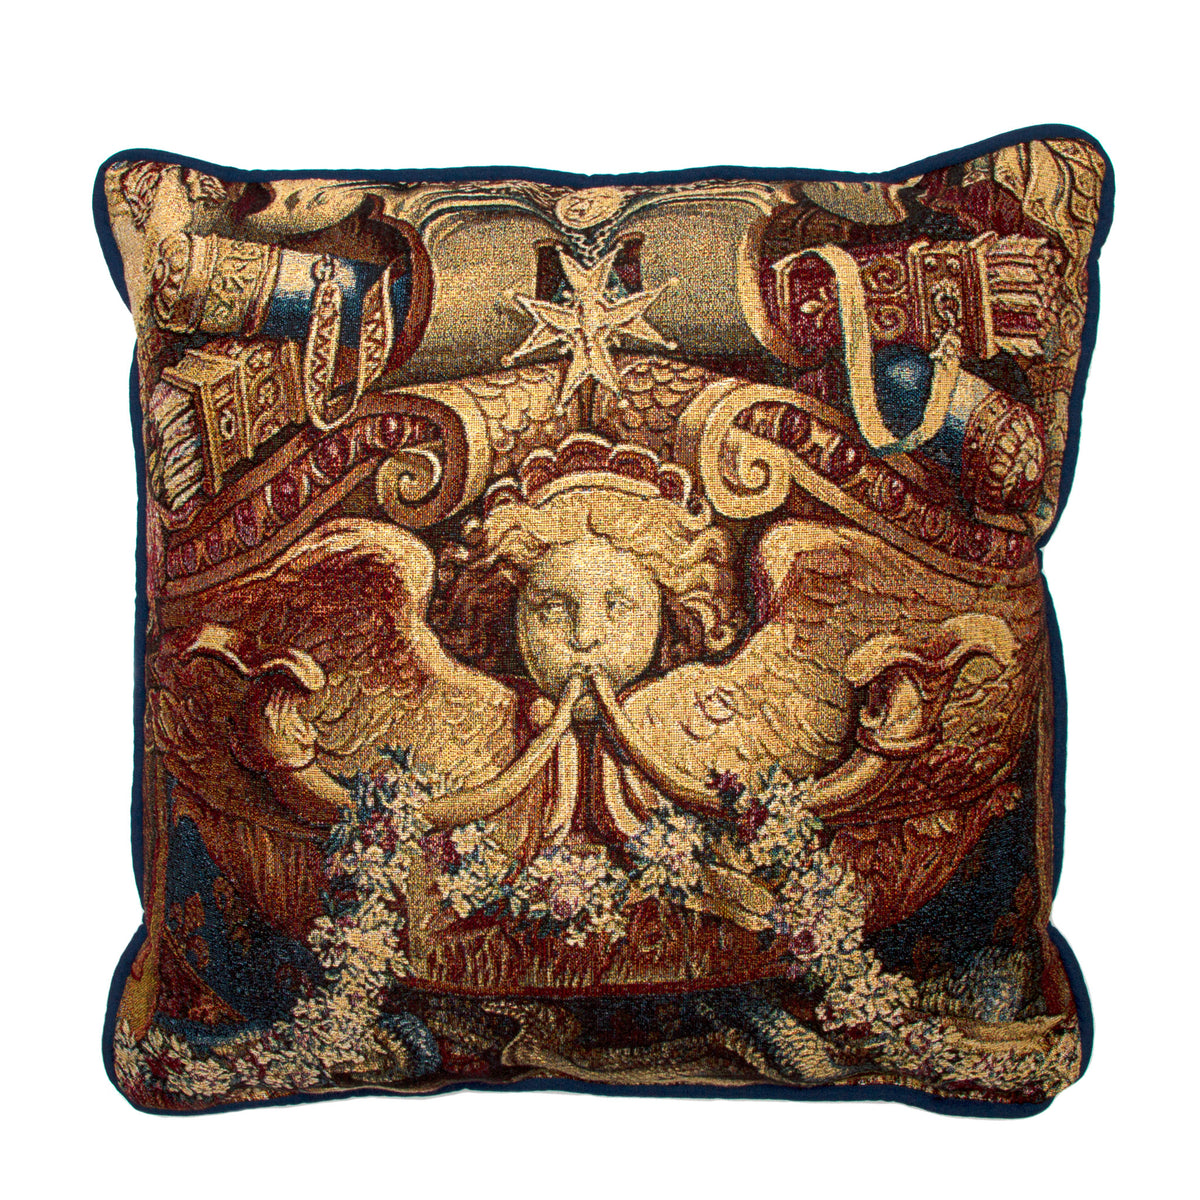 Portiere of the Chariot of Triumph-Tapestry Pillow  | Getty Store